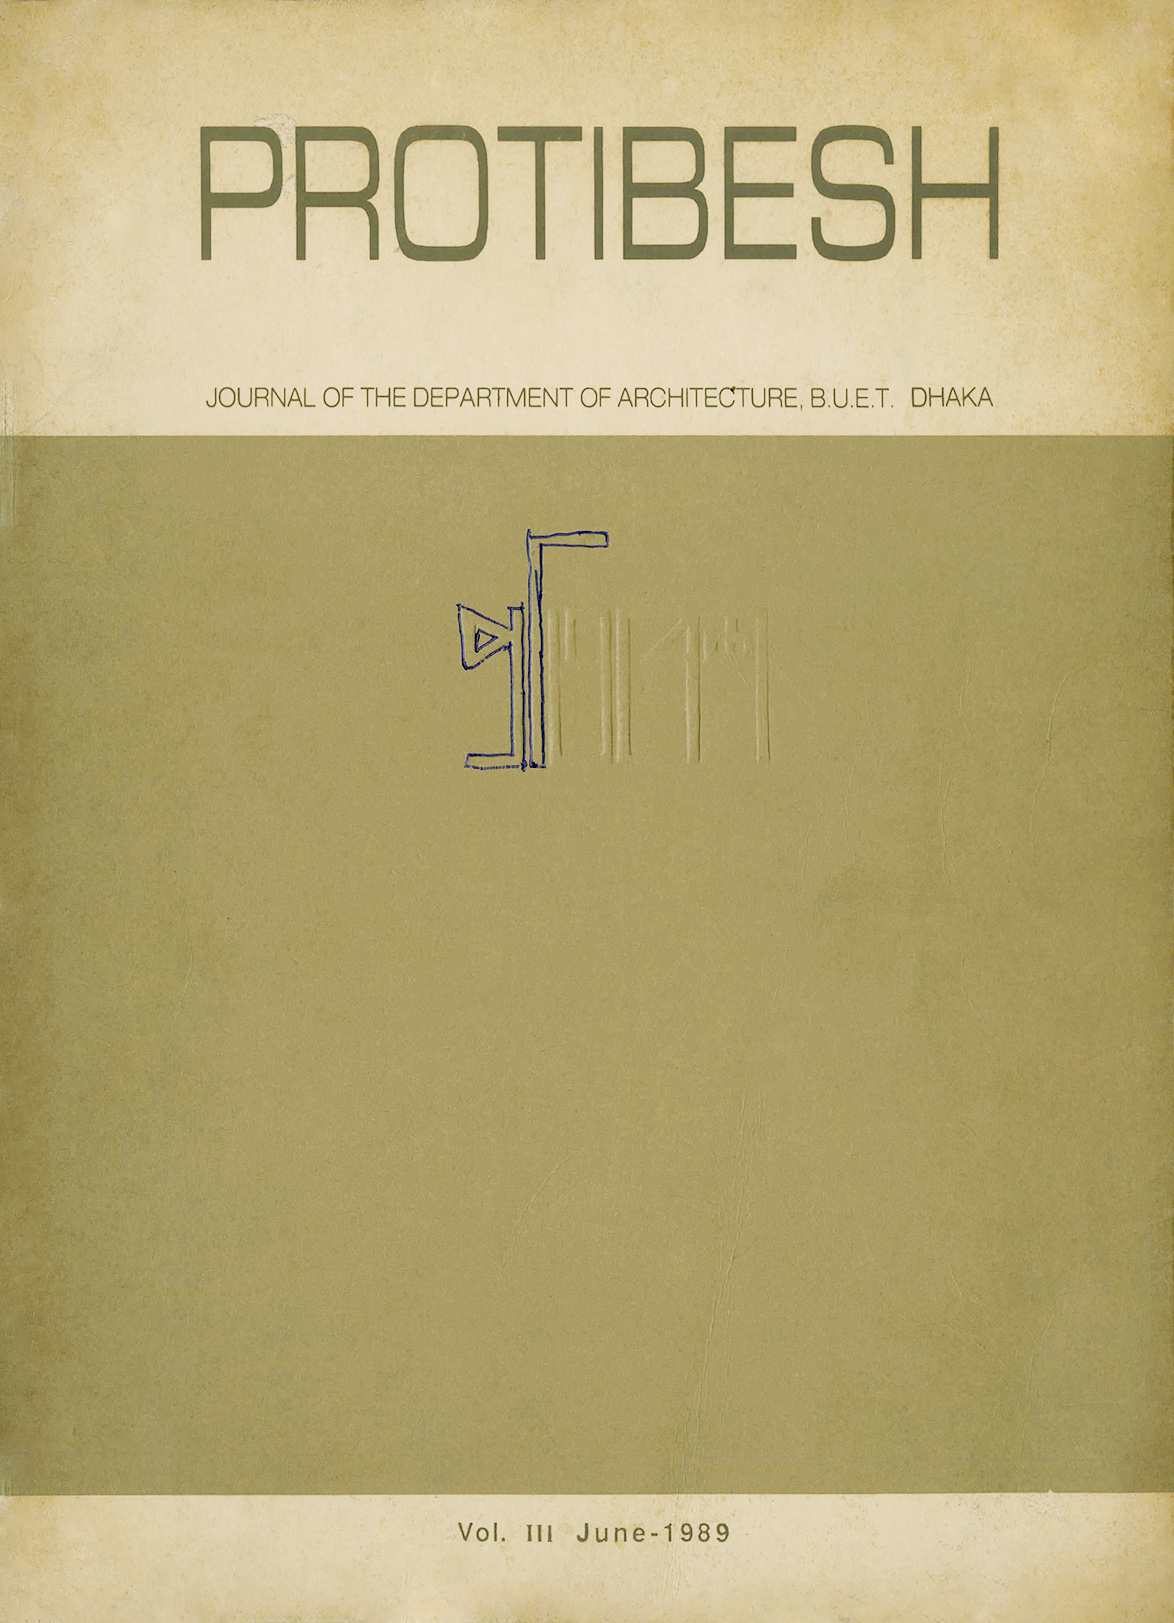 Cover image of Protibesh Vol-03 No-01 June-1989 - Journal of the Department of Architecture, BUET